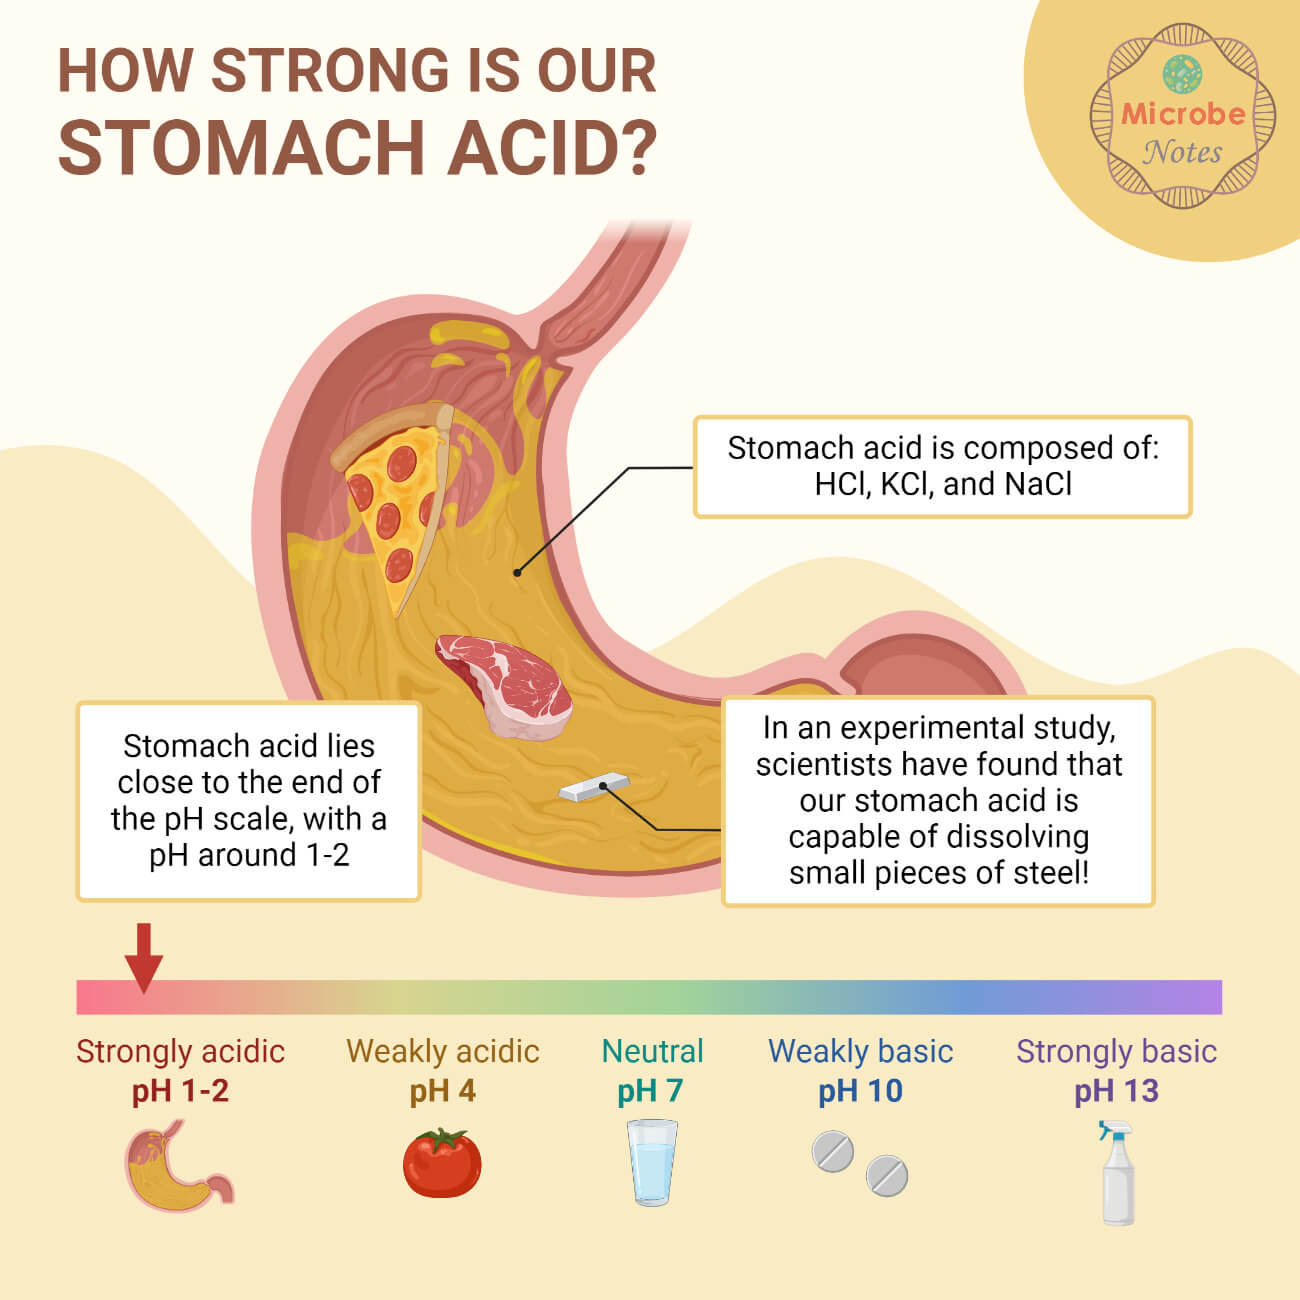 How Strong is Our Stomach Acid